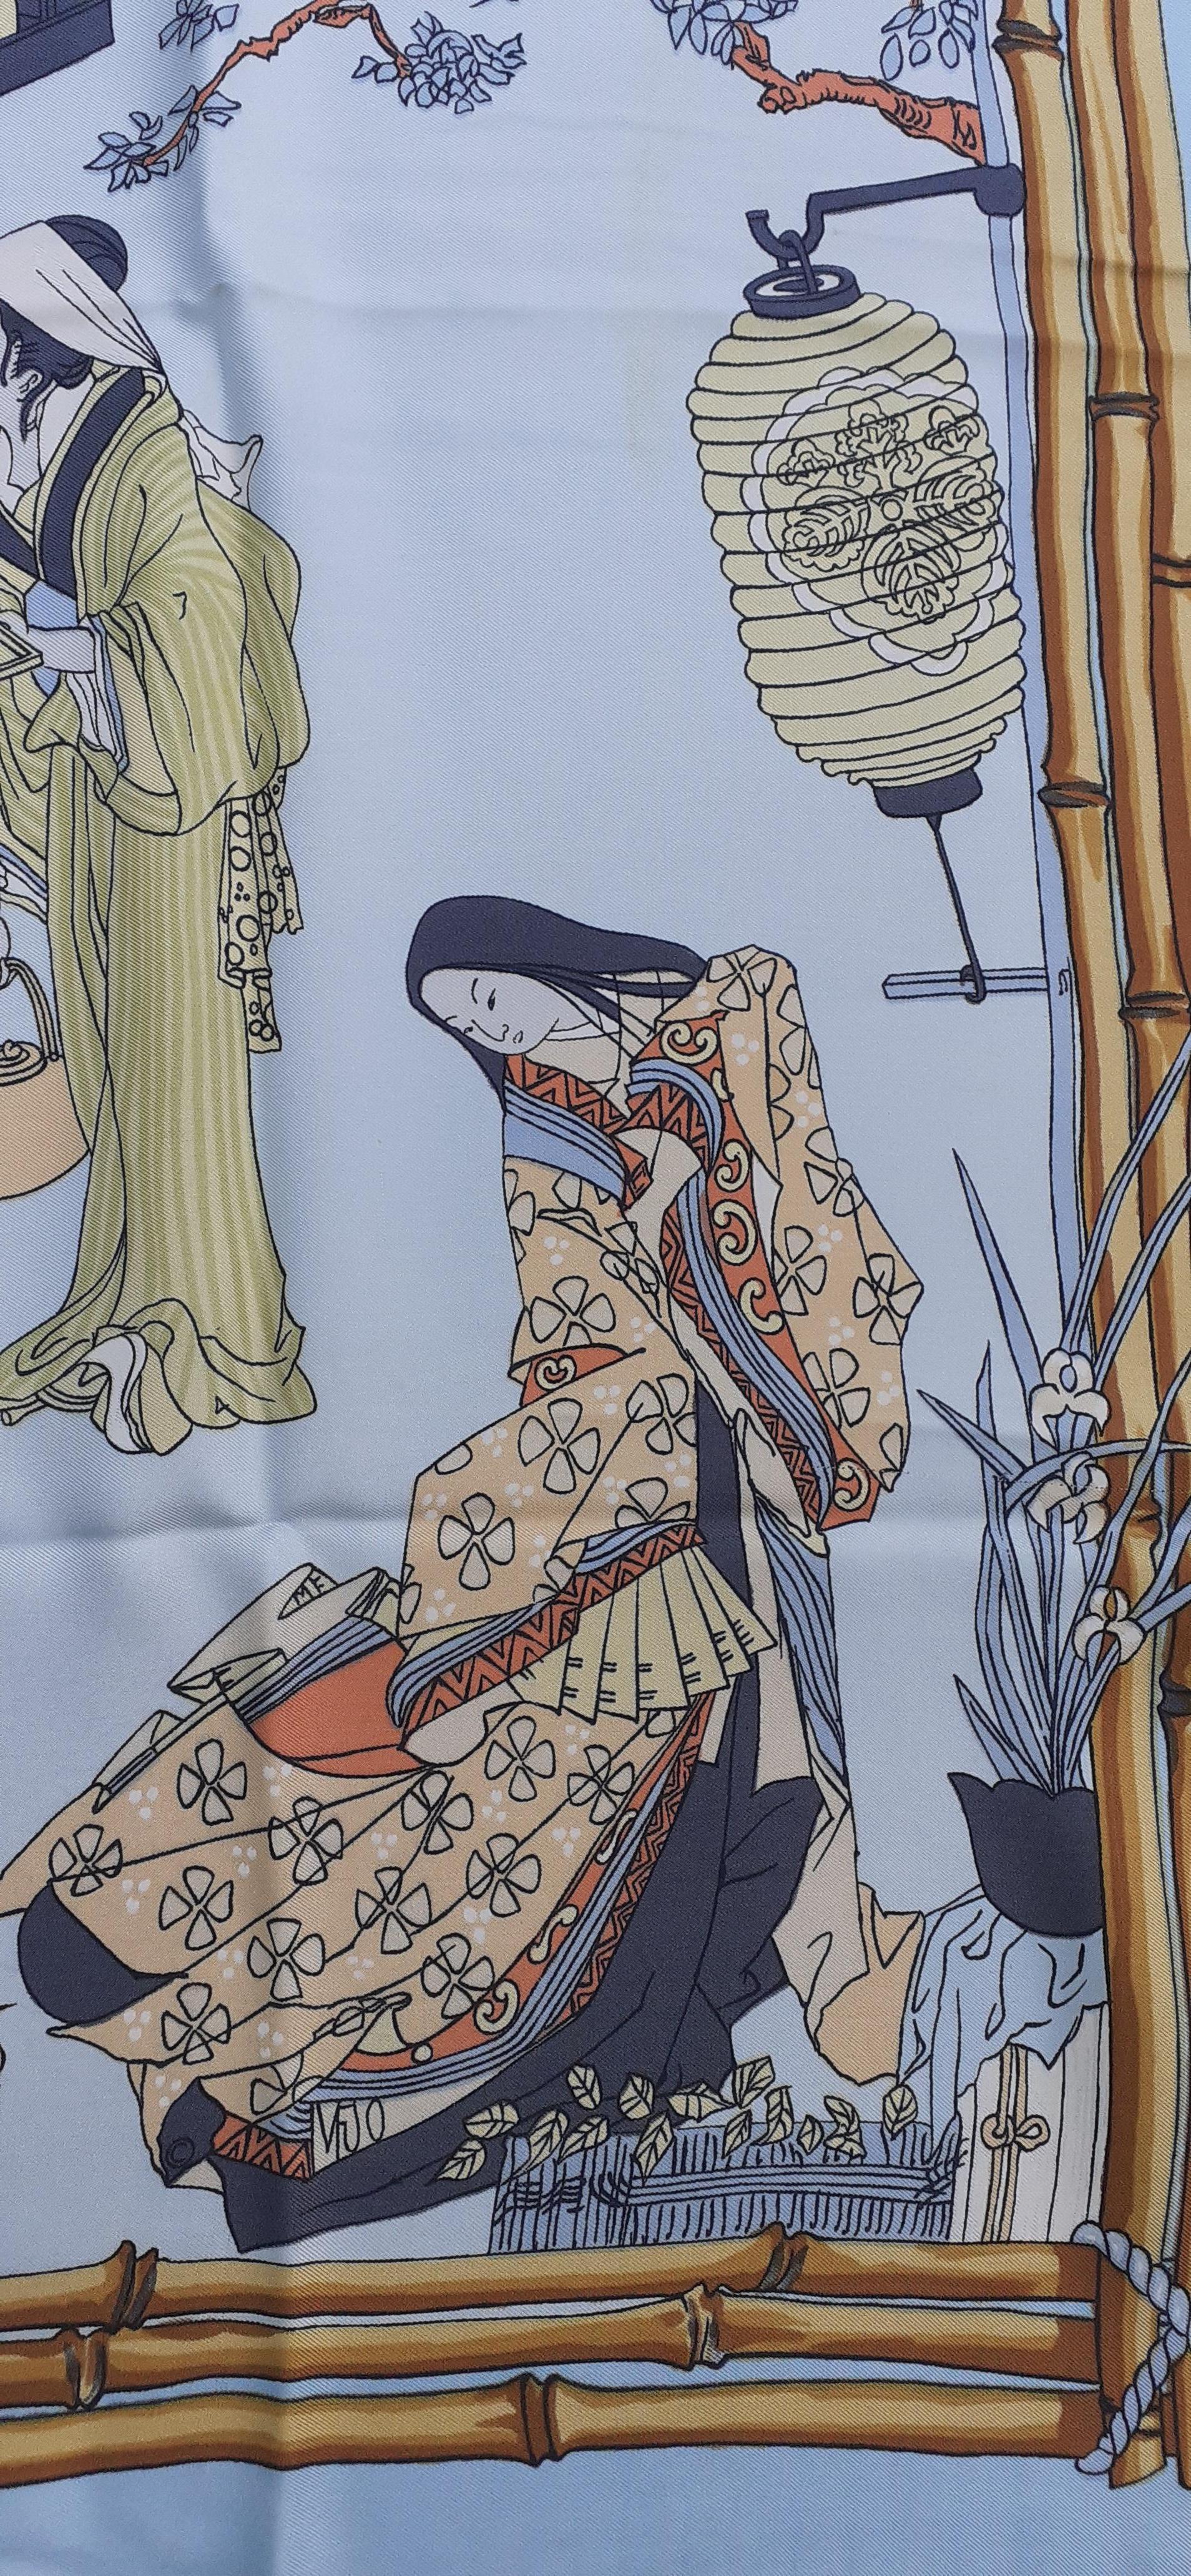 Beautiful Authentic Hermès Scarf

Pattern: Geishas, also called 